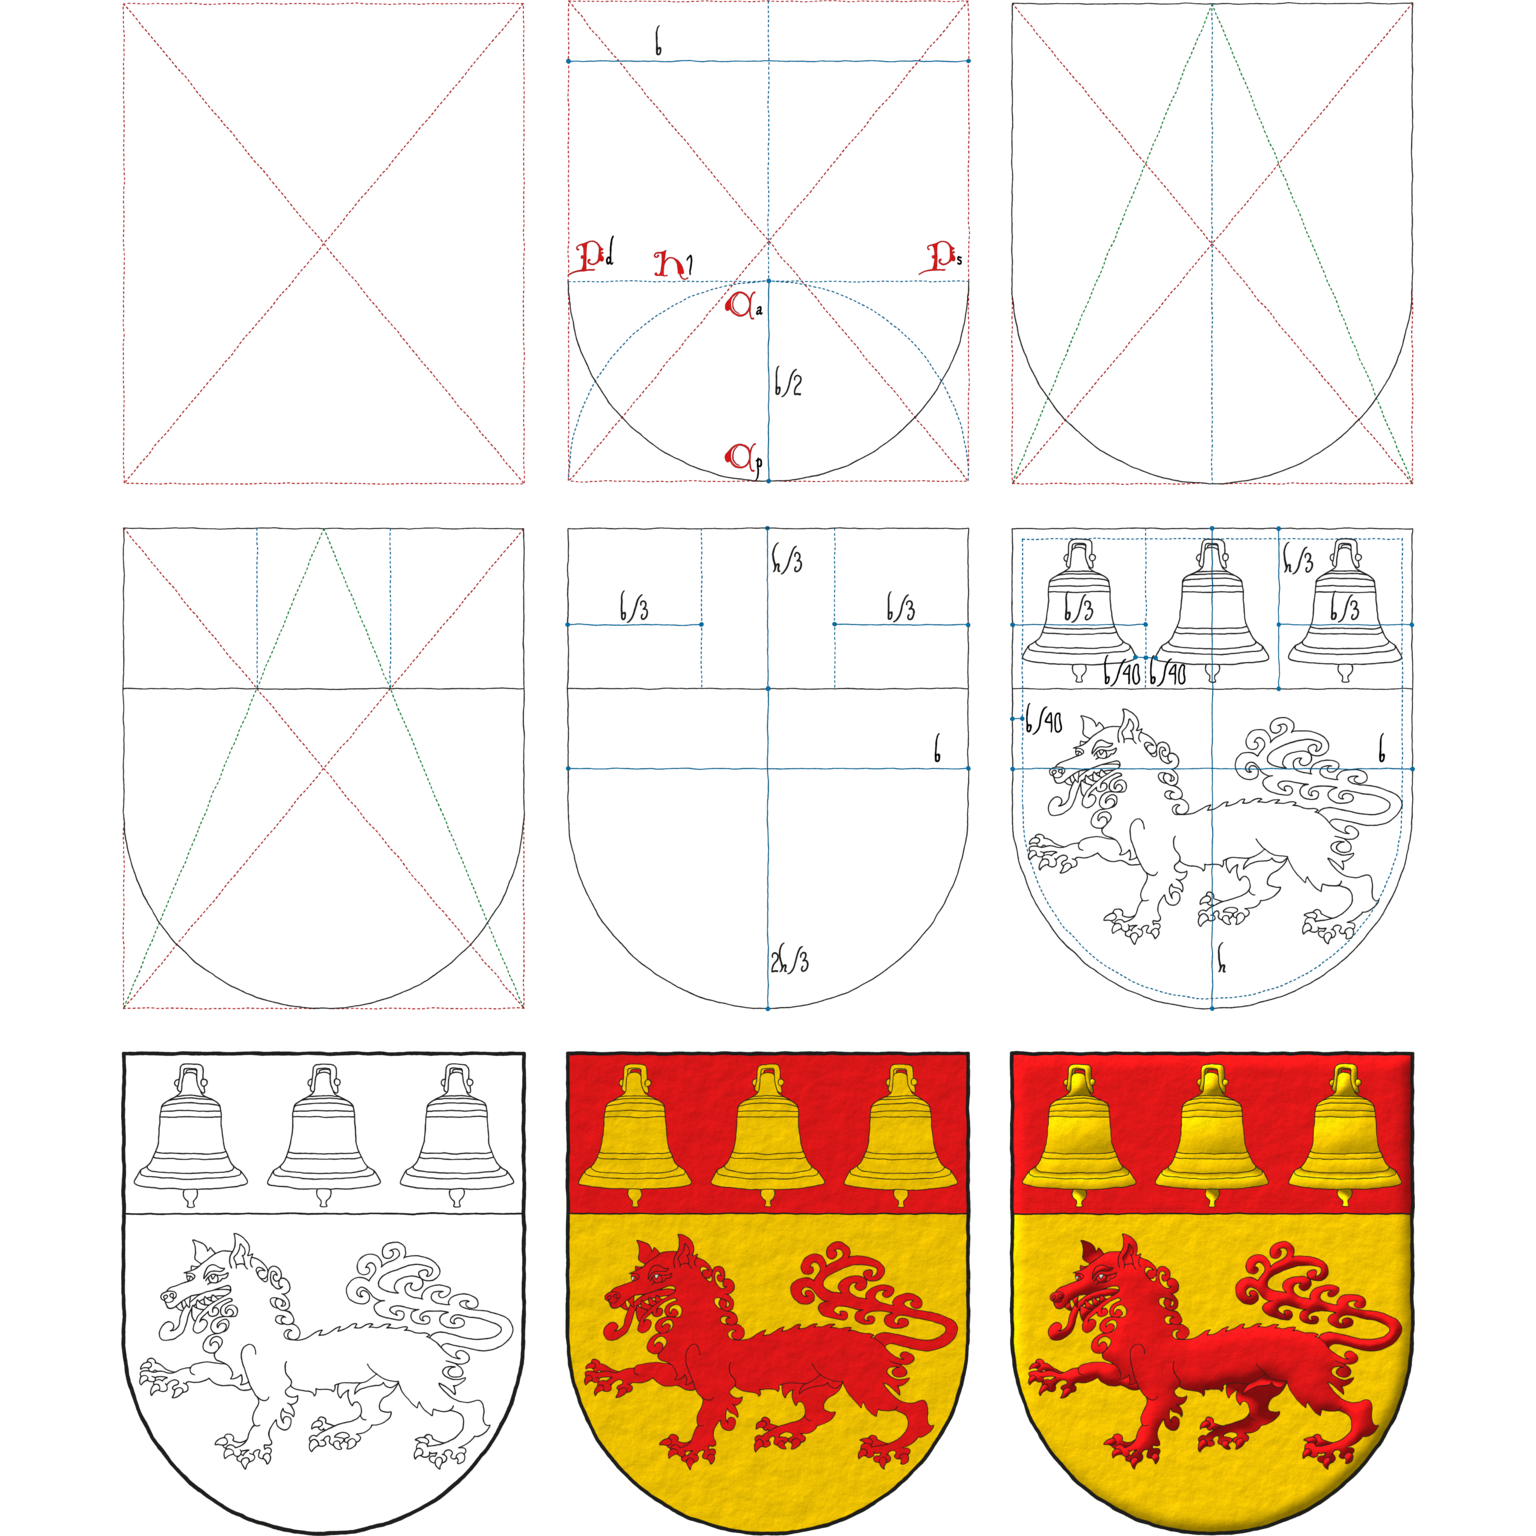 The coat of arms of Jean-Christophe Loubet del Bayle emblazoned by me step by step. Blazon: Or, a wolf passant Gules; on a chief Gules, three bells Or.